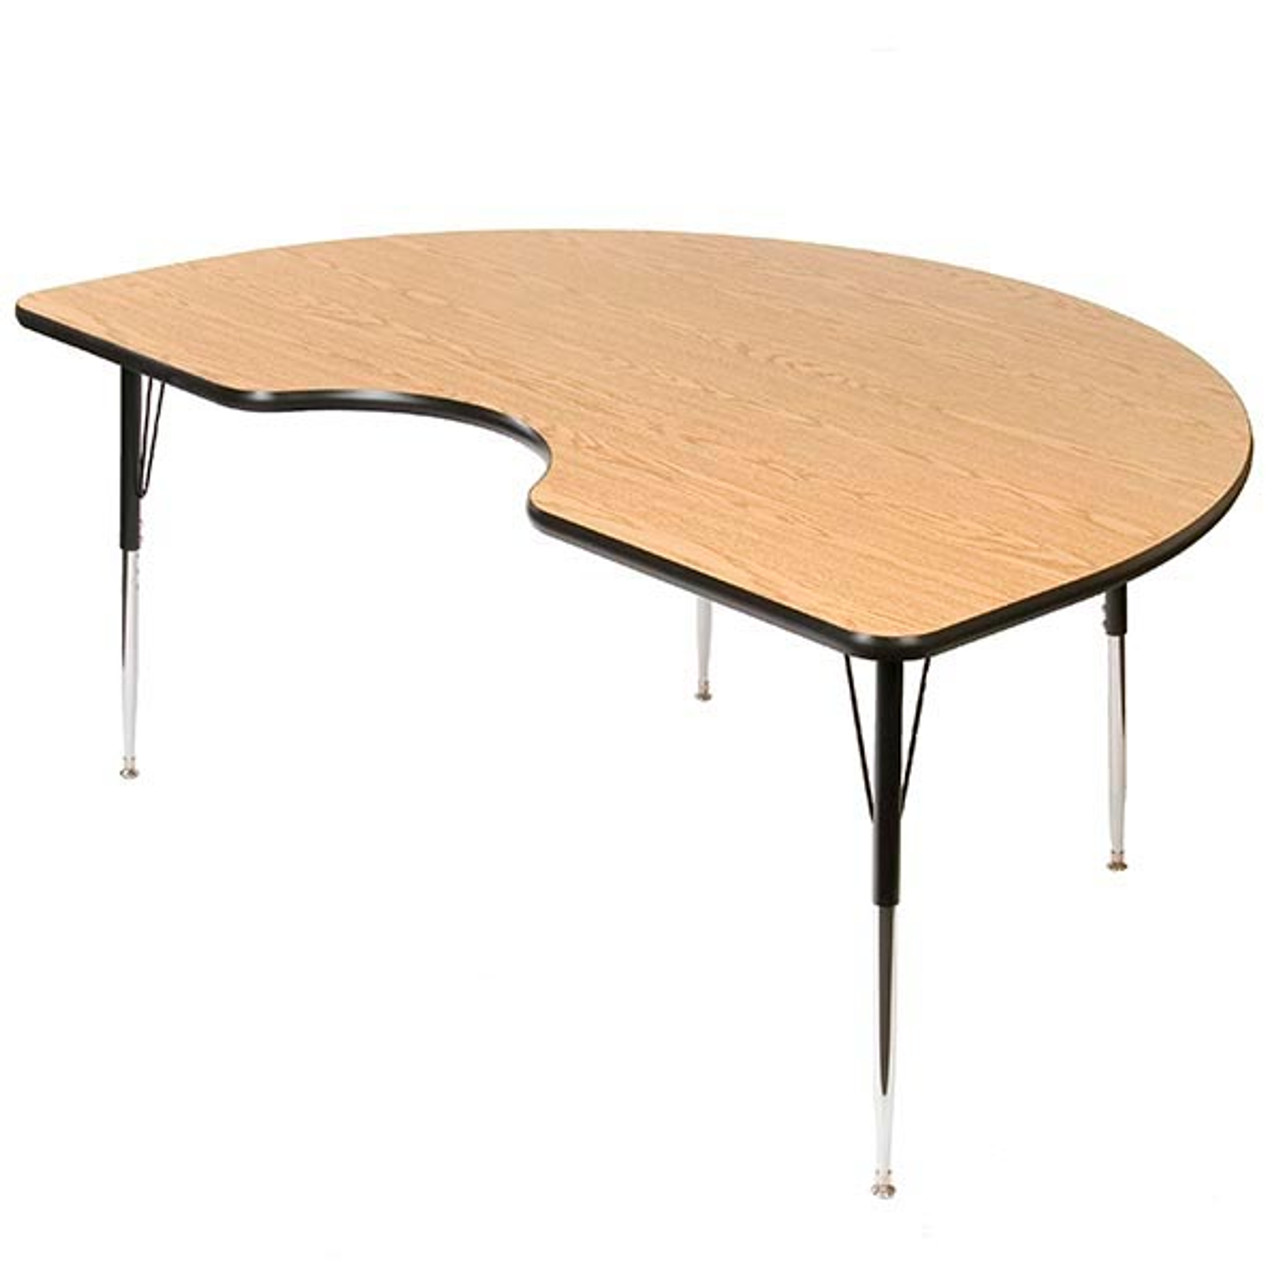 Horseshoe Activity Table with High Pressure Laminate Top - Scholar Craft FS949HS6066-2140